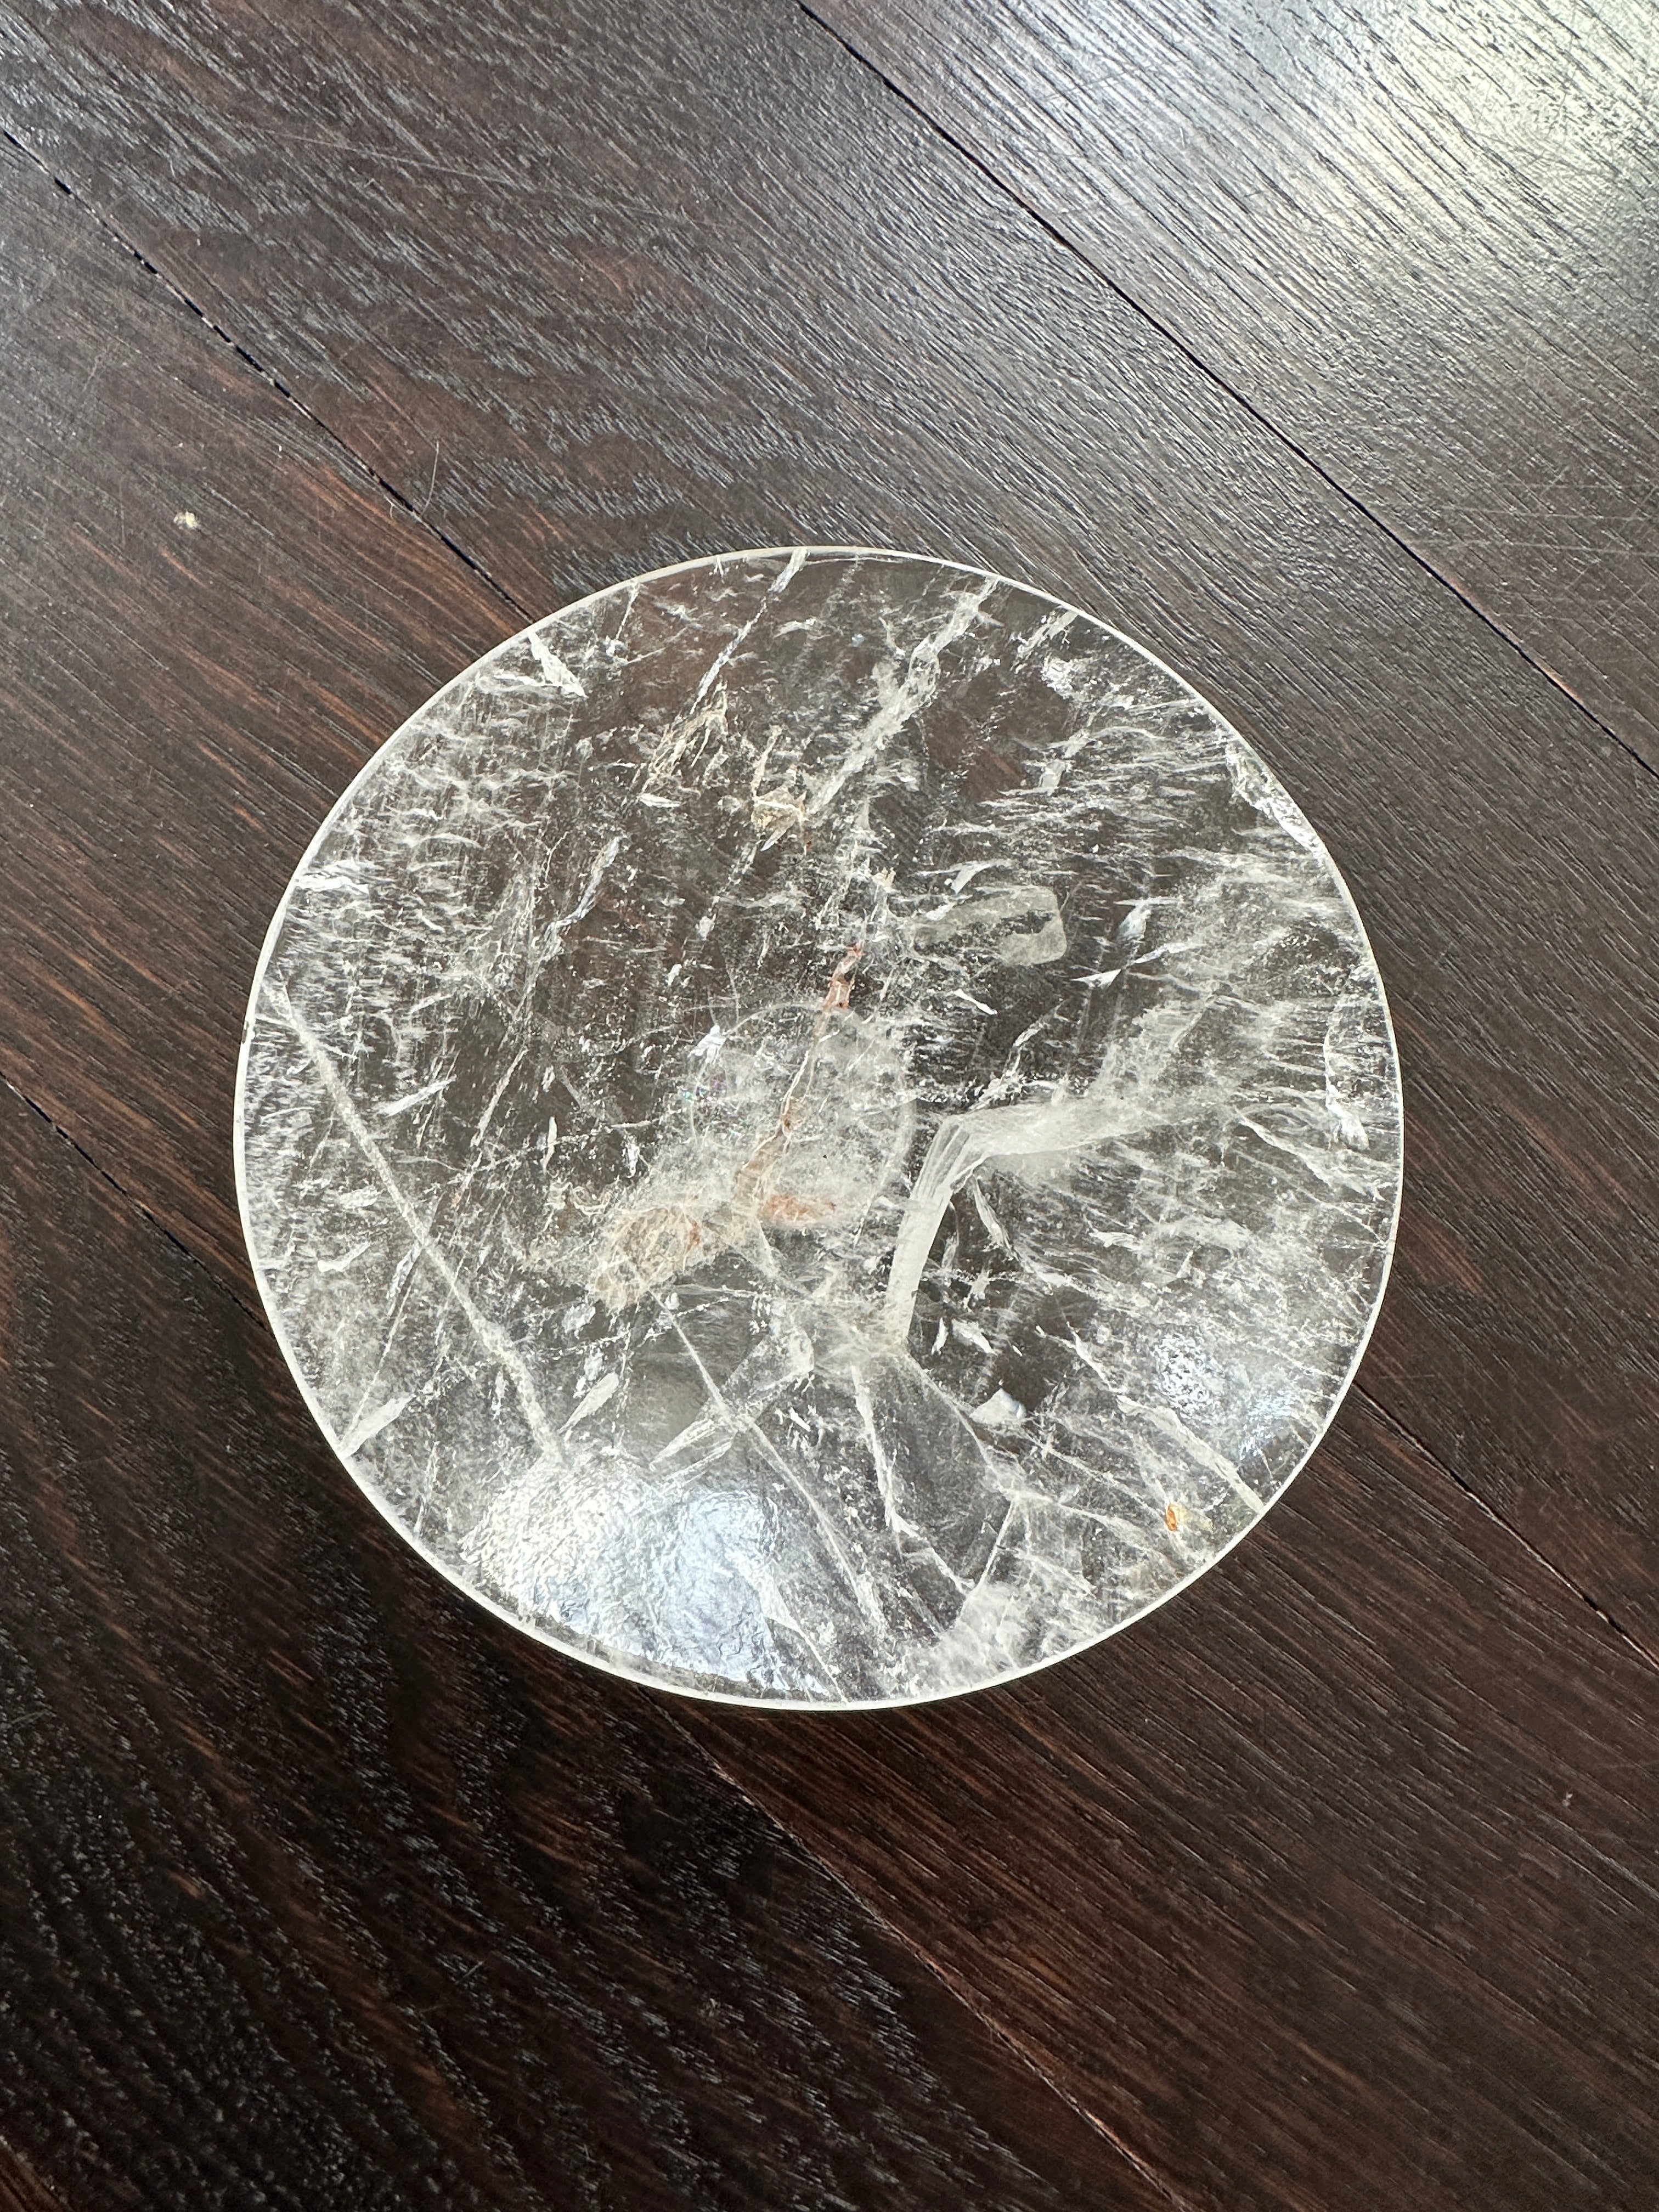 Natural rock crystal dish sculpted Anonymous circa 1970 
Rock crystal cup hand carved in a single block, feature a very interesting pattern.
Good condition, no scratches or chips.